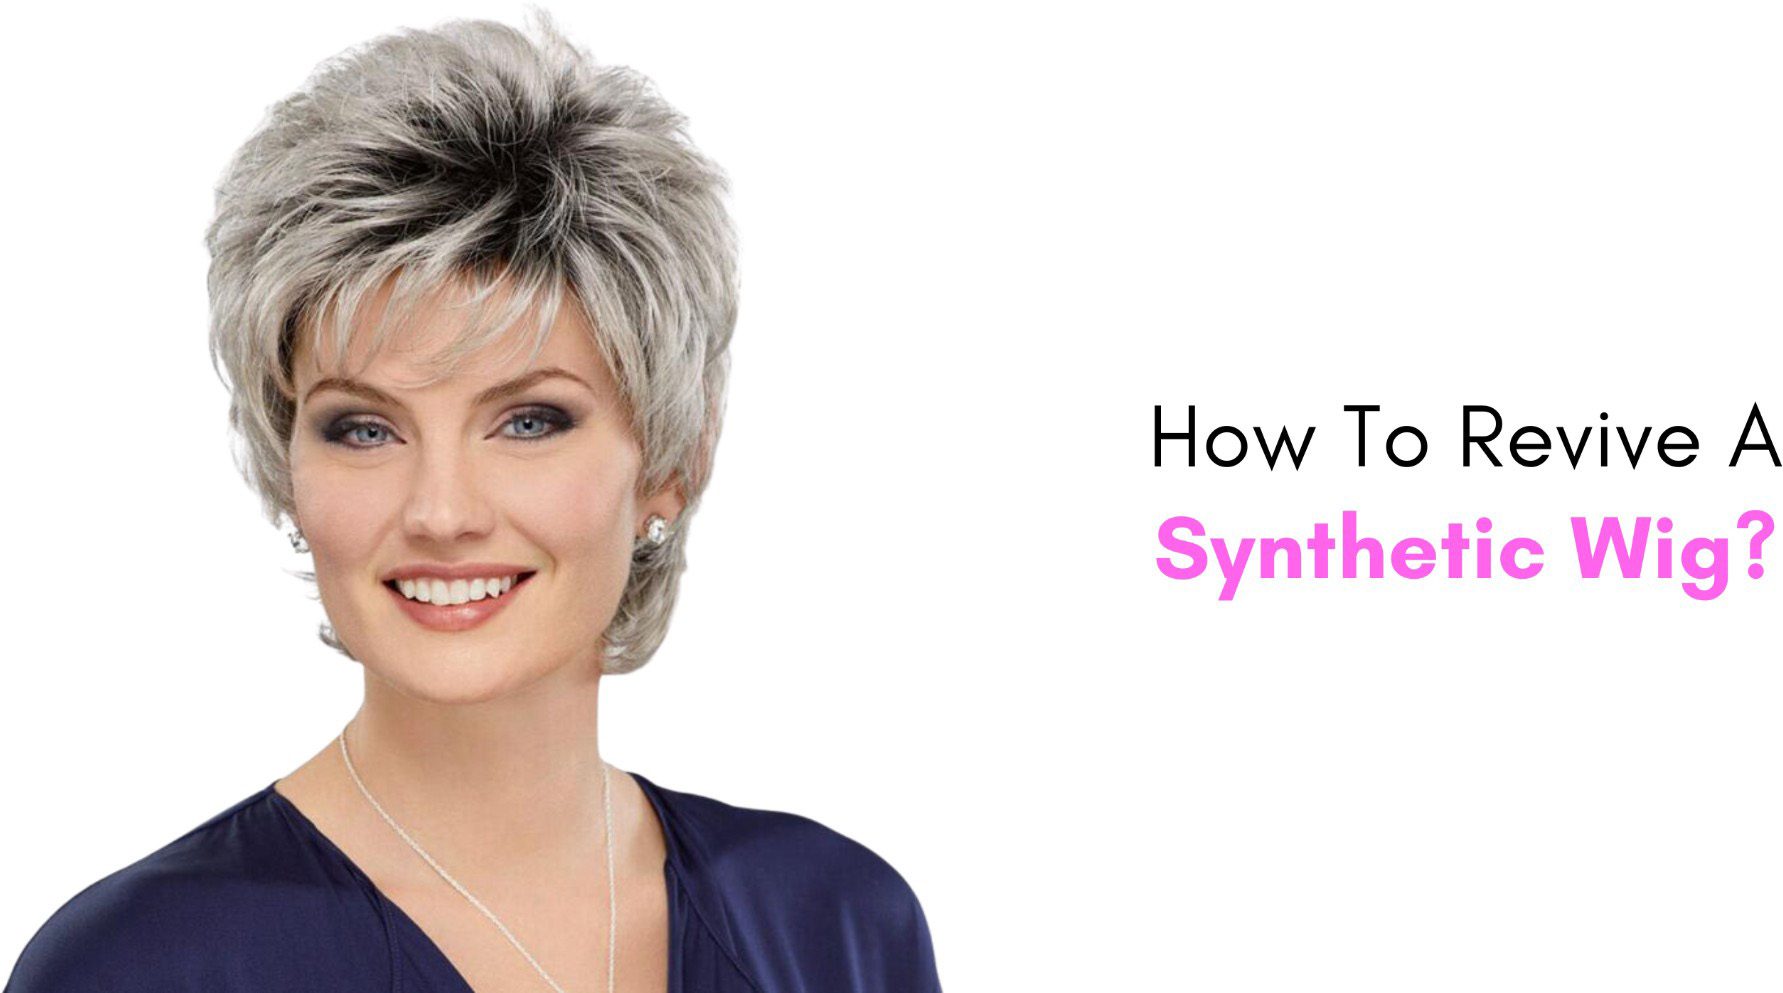 How To Revive A Synthetic Wig? | Paula Young Blog